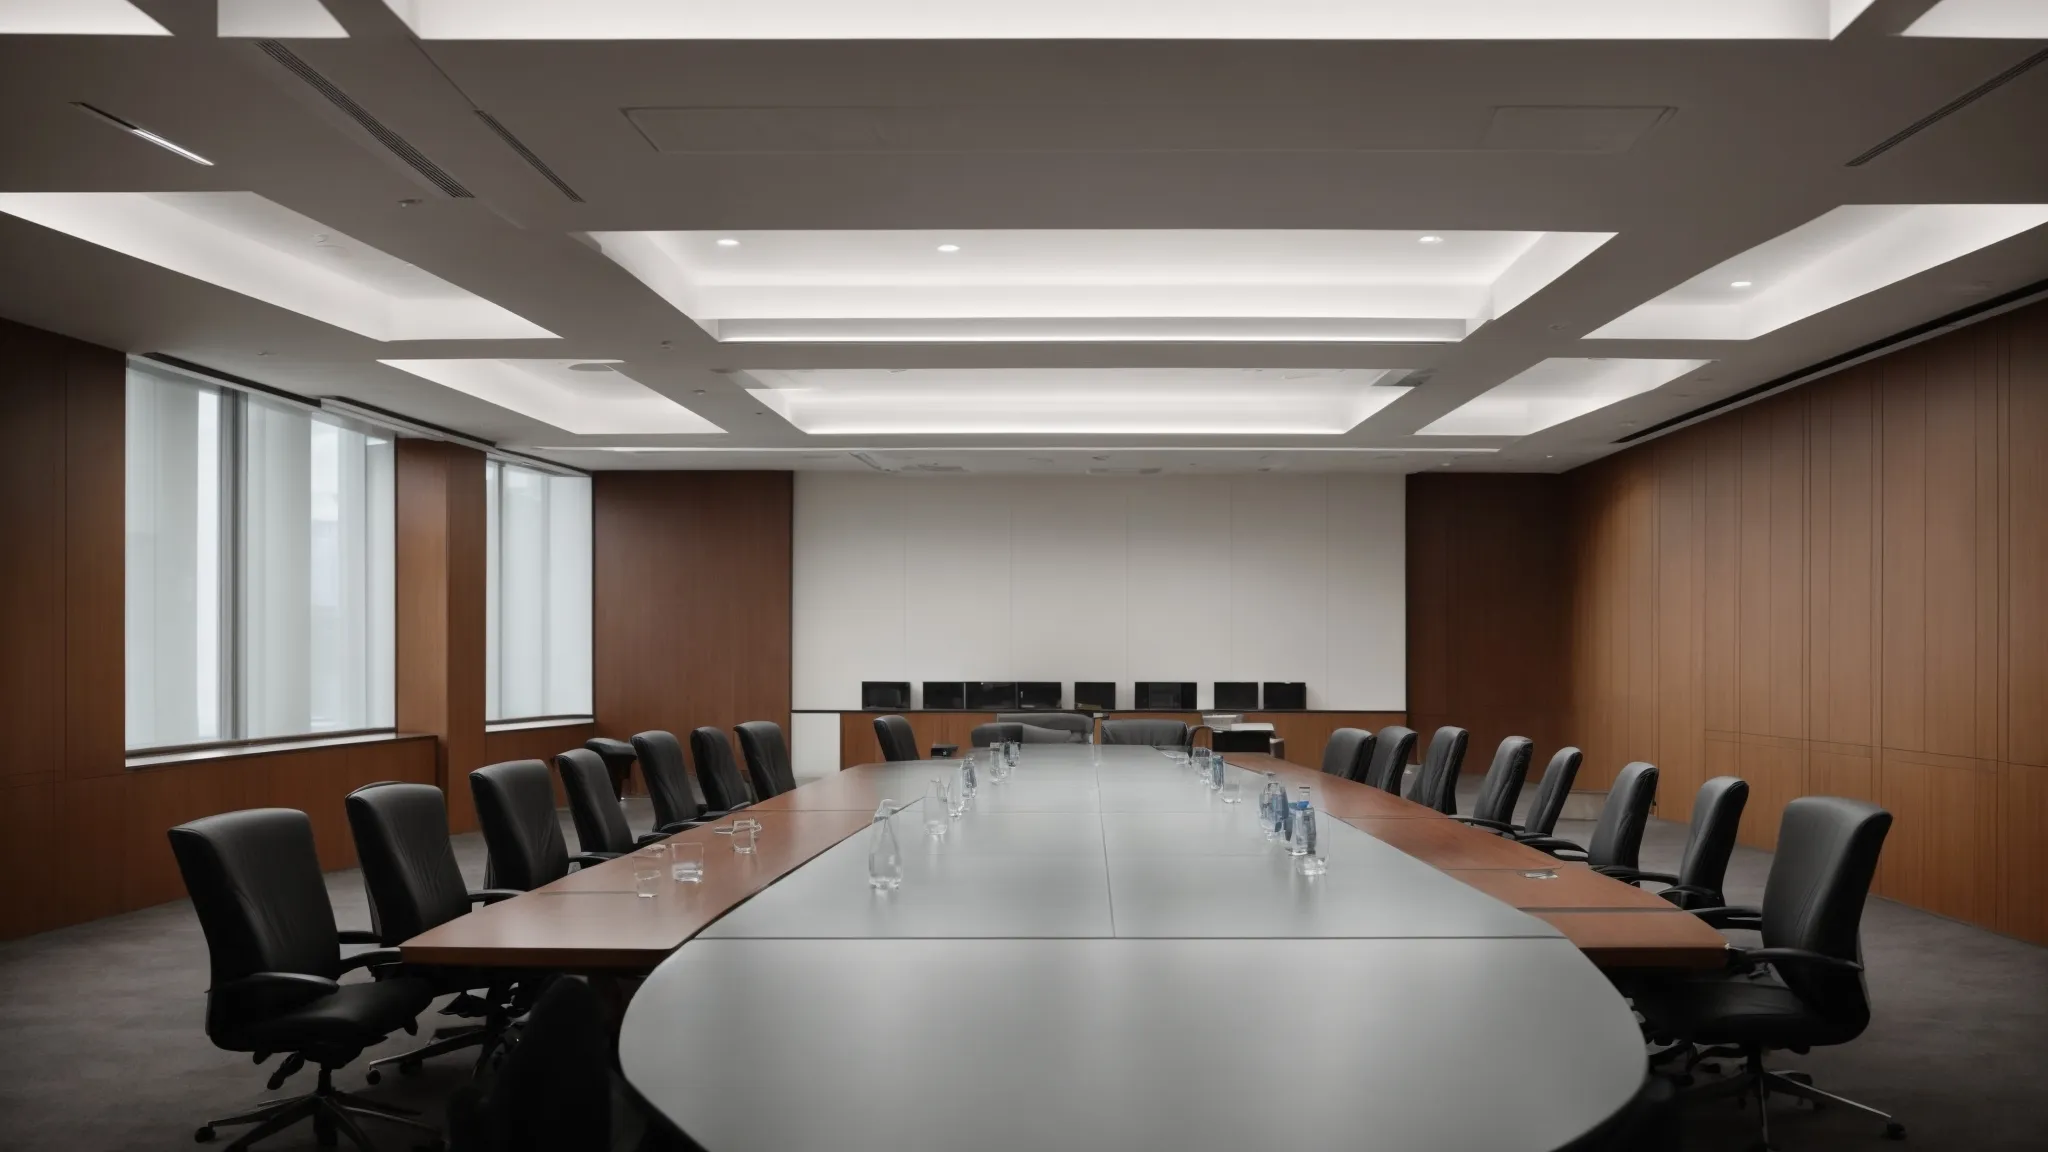 a modern conference room with a long table and chairs, staged for a discussion on international arbitration reforms.